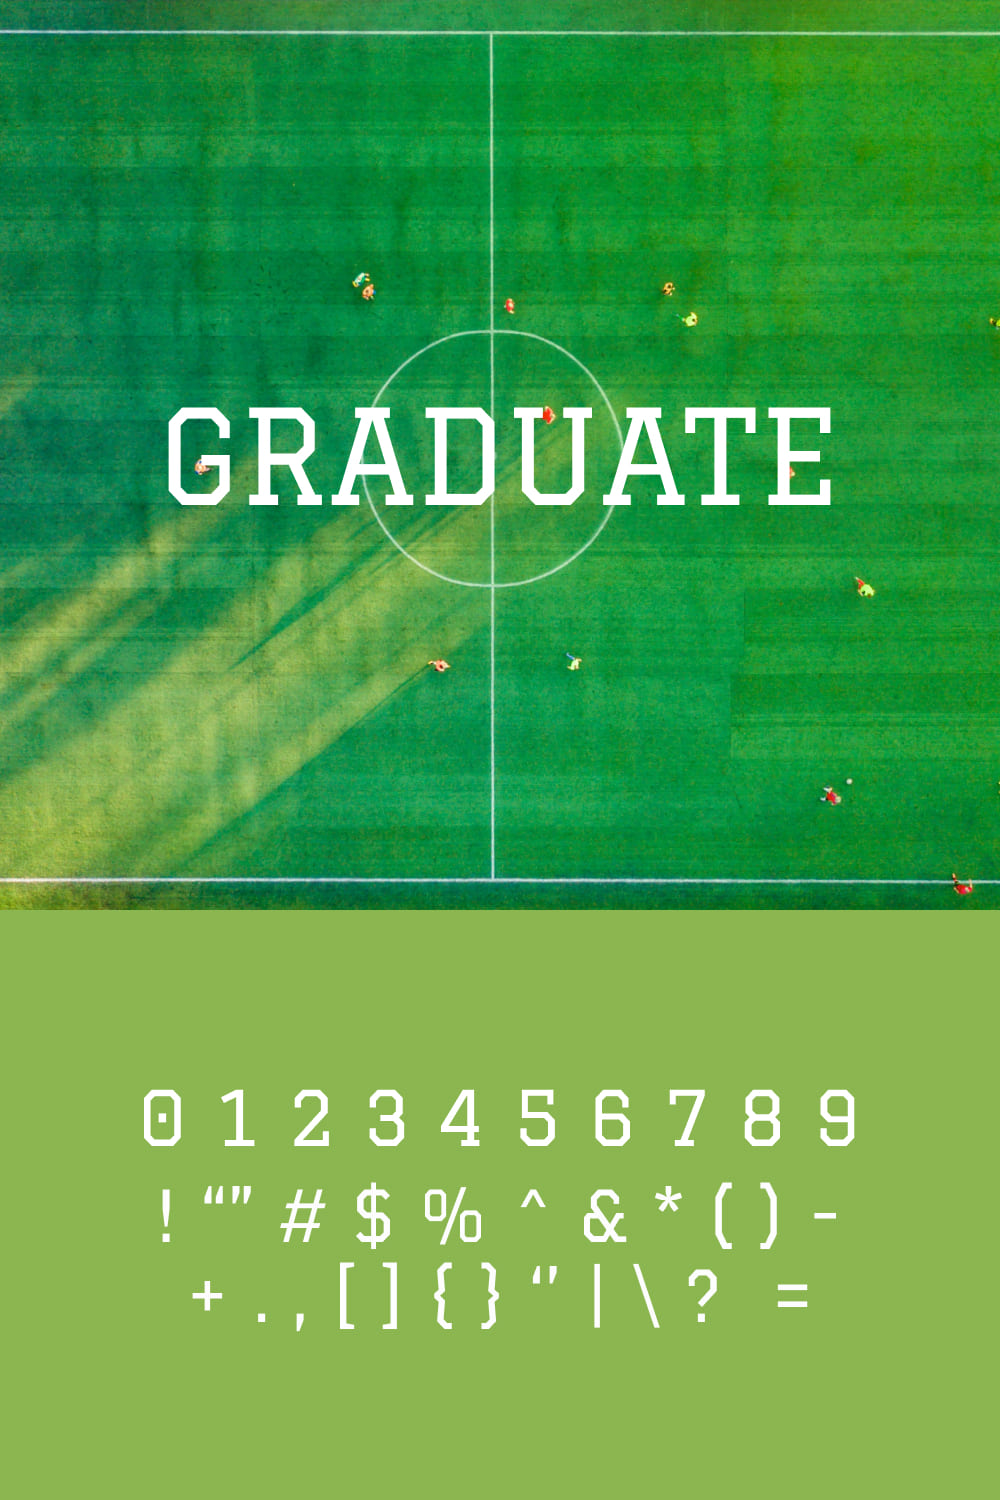 An example of a font in white on a green football field.